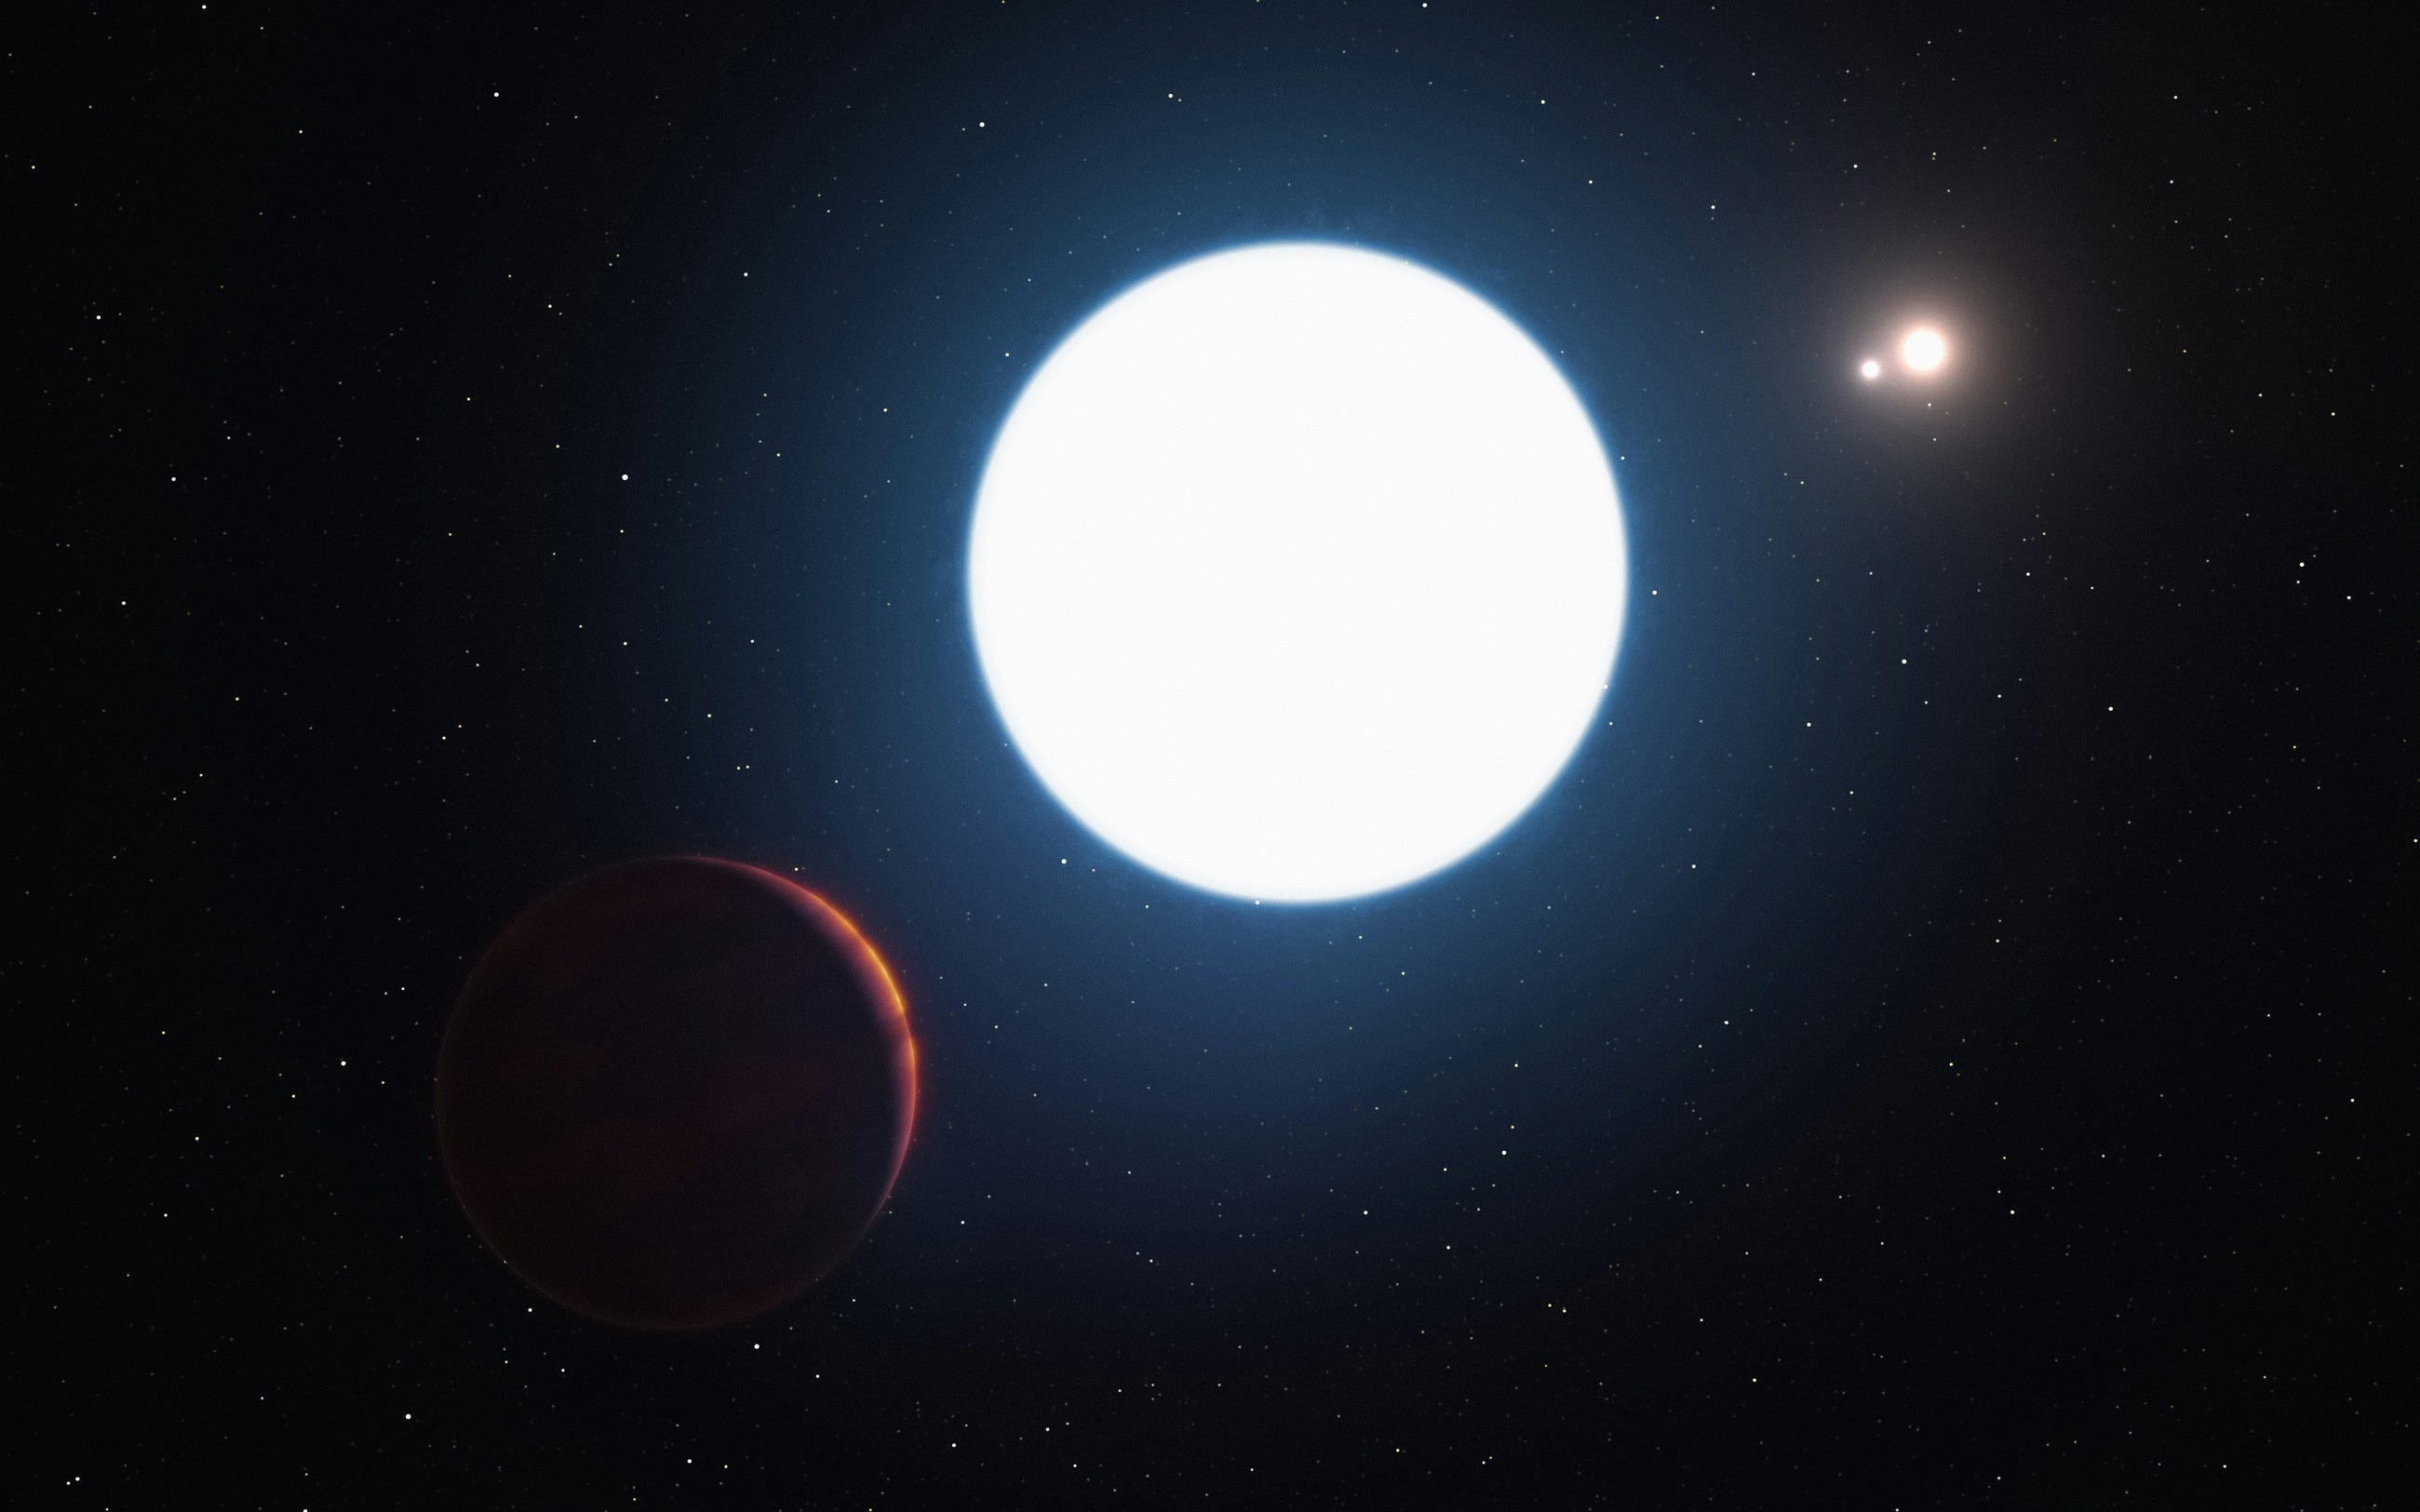 The insane ways astronomers search for exoplanets!